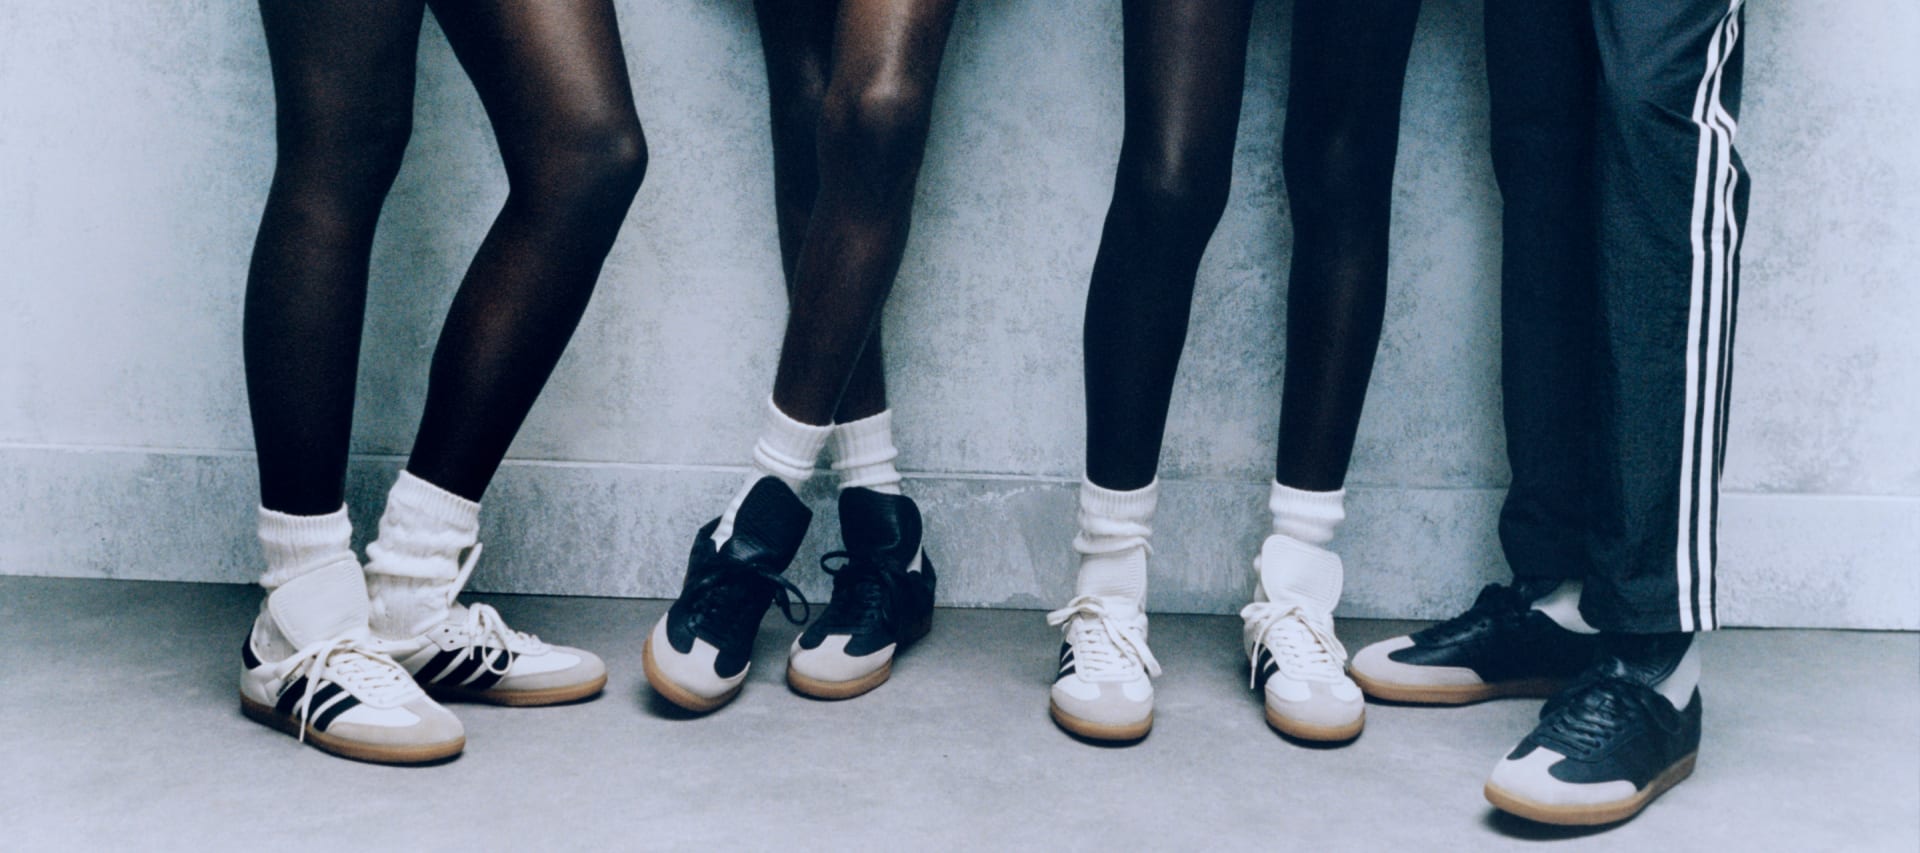 Models stand against wall wearing Samba sneakers